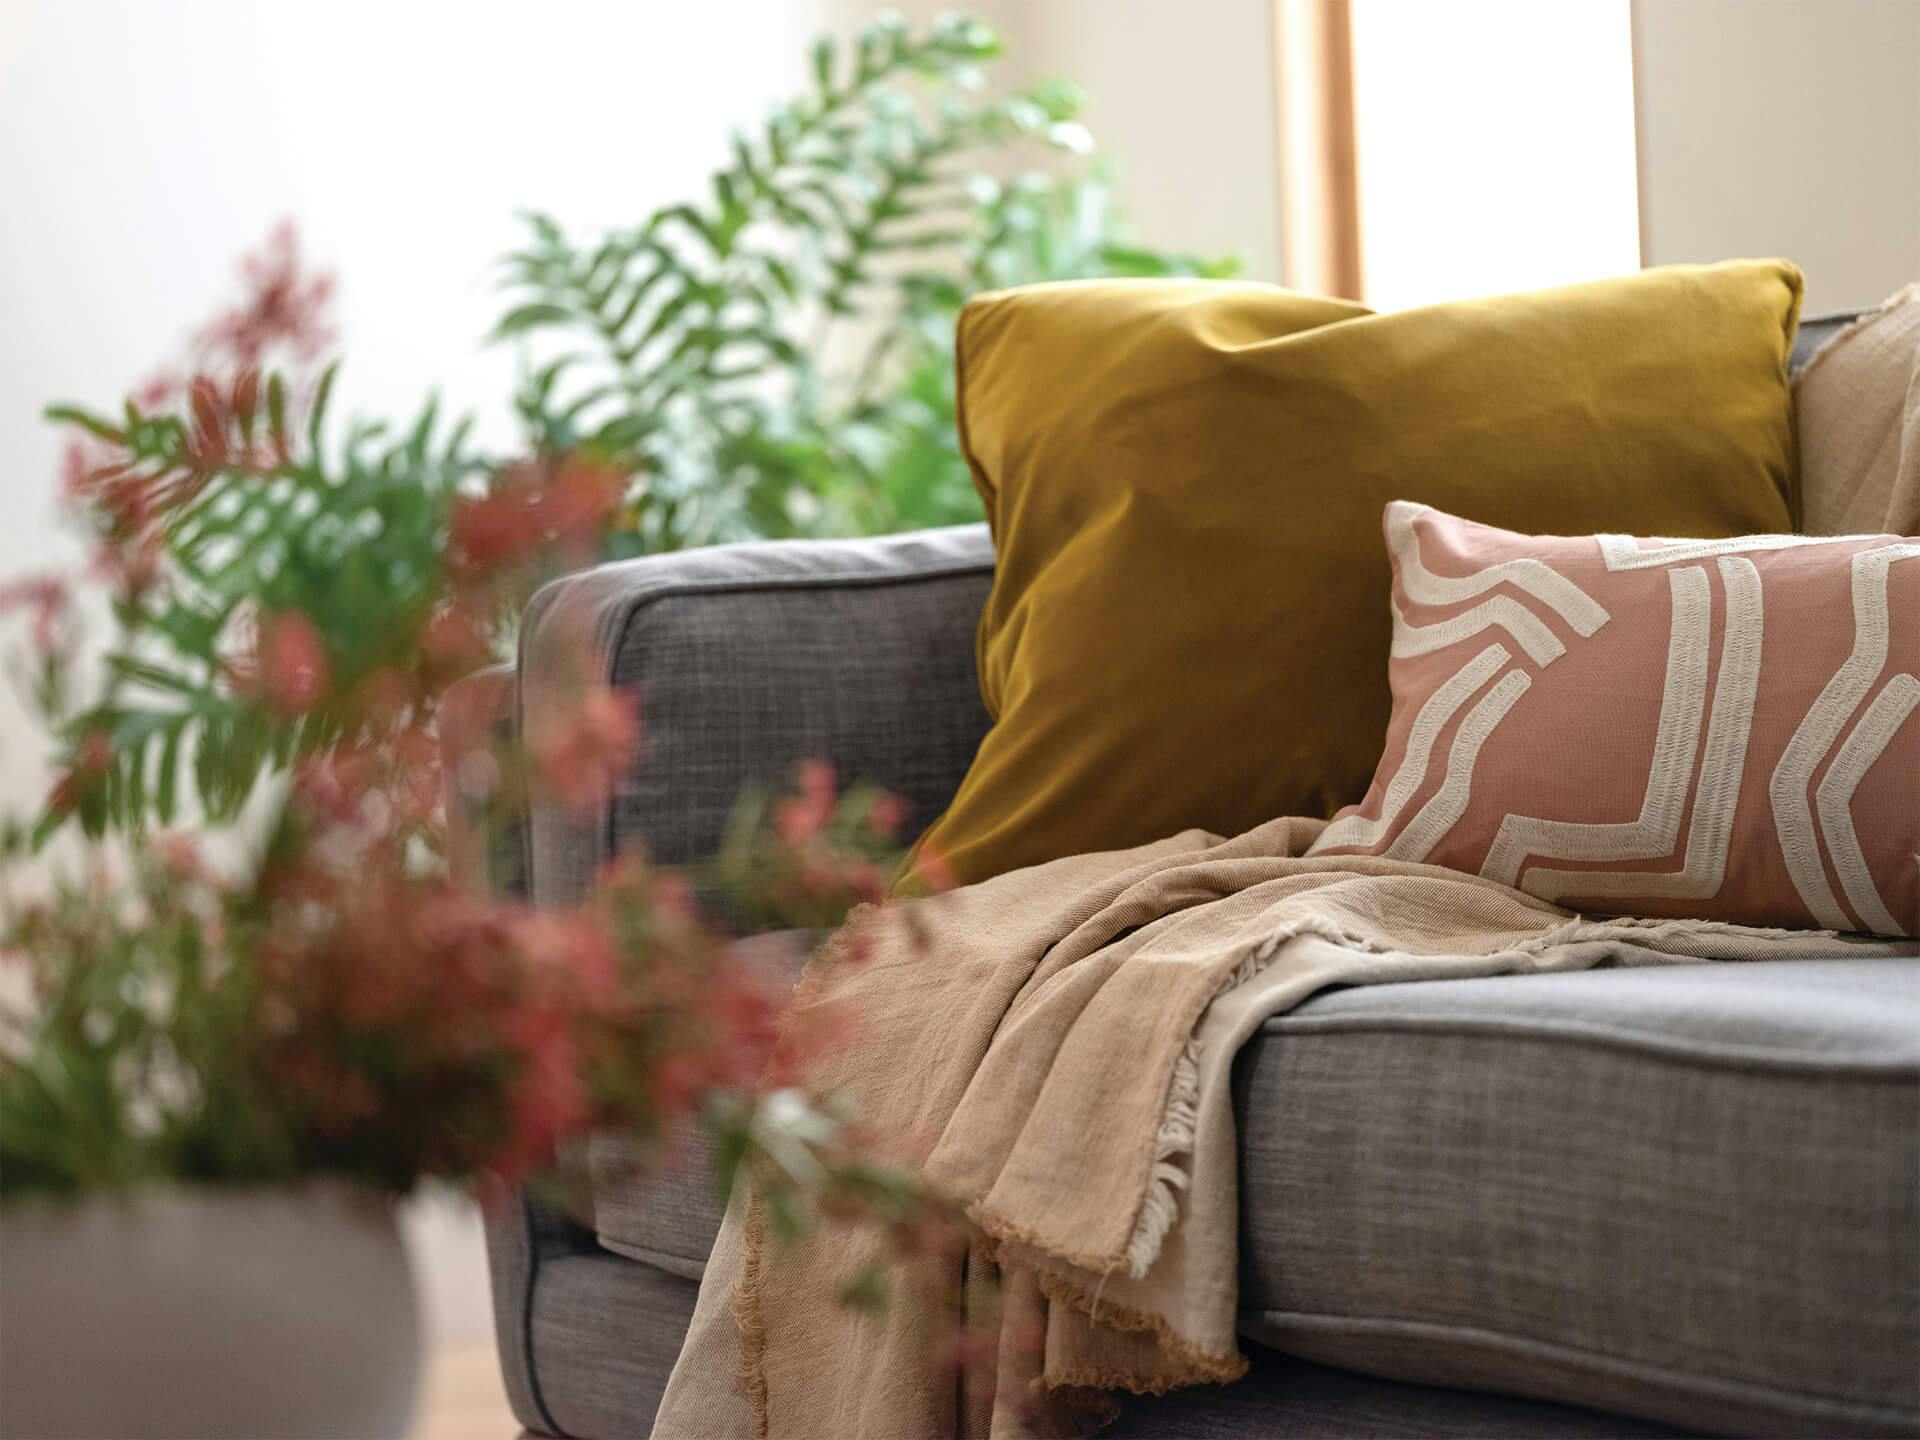 Pillows and a blanket on a couch surrounded by plants